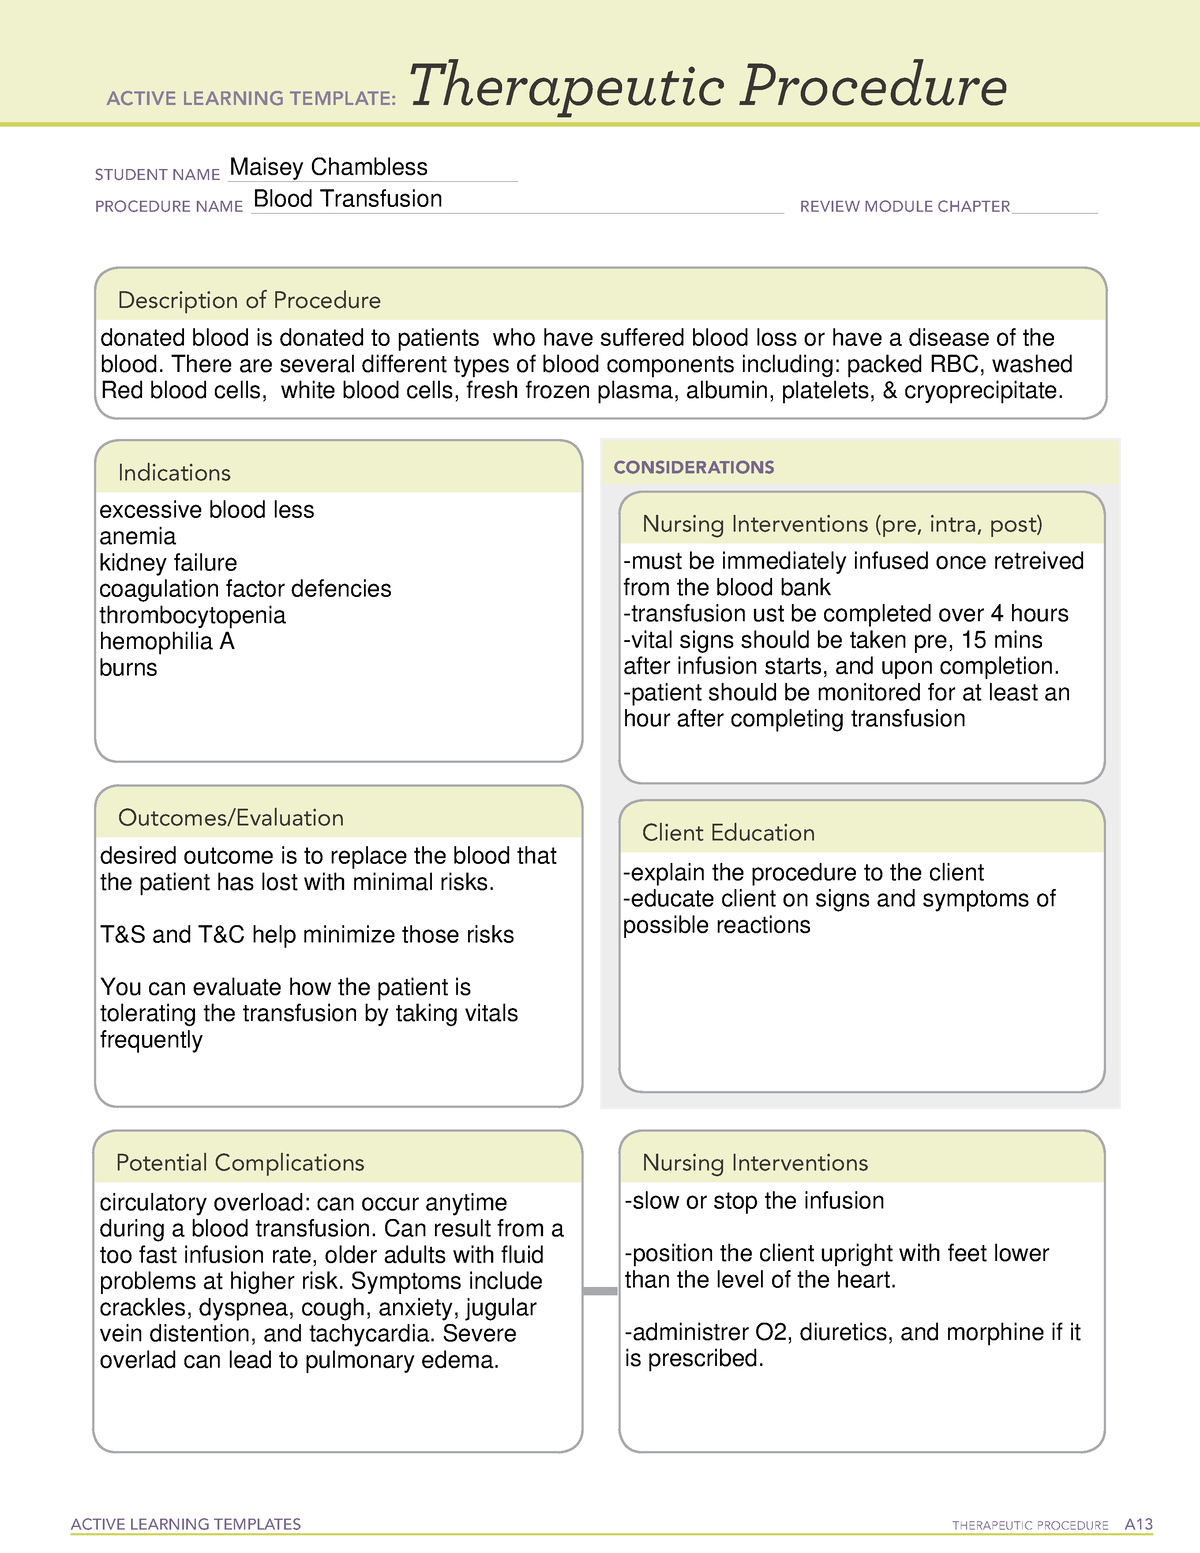 Blood transfusion ati template ACTIVE LEARNING TEMPLATES